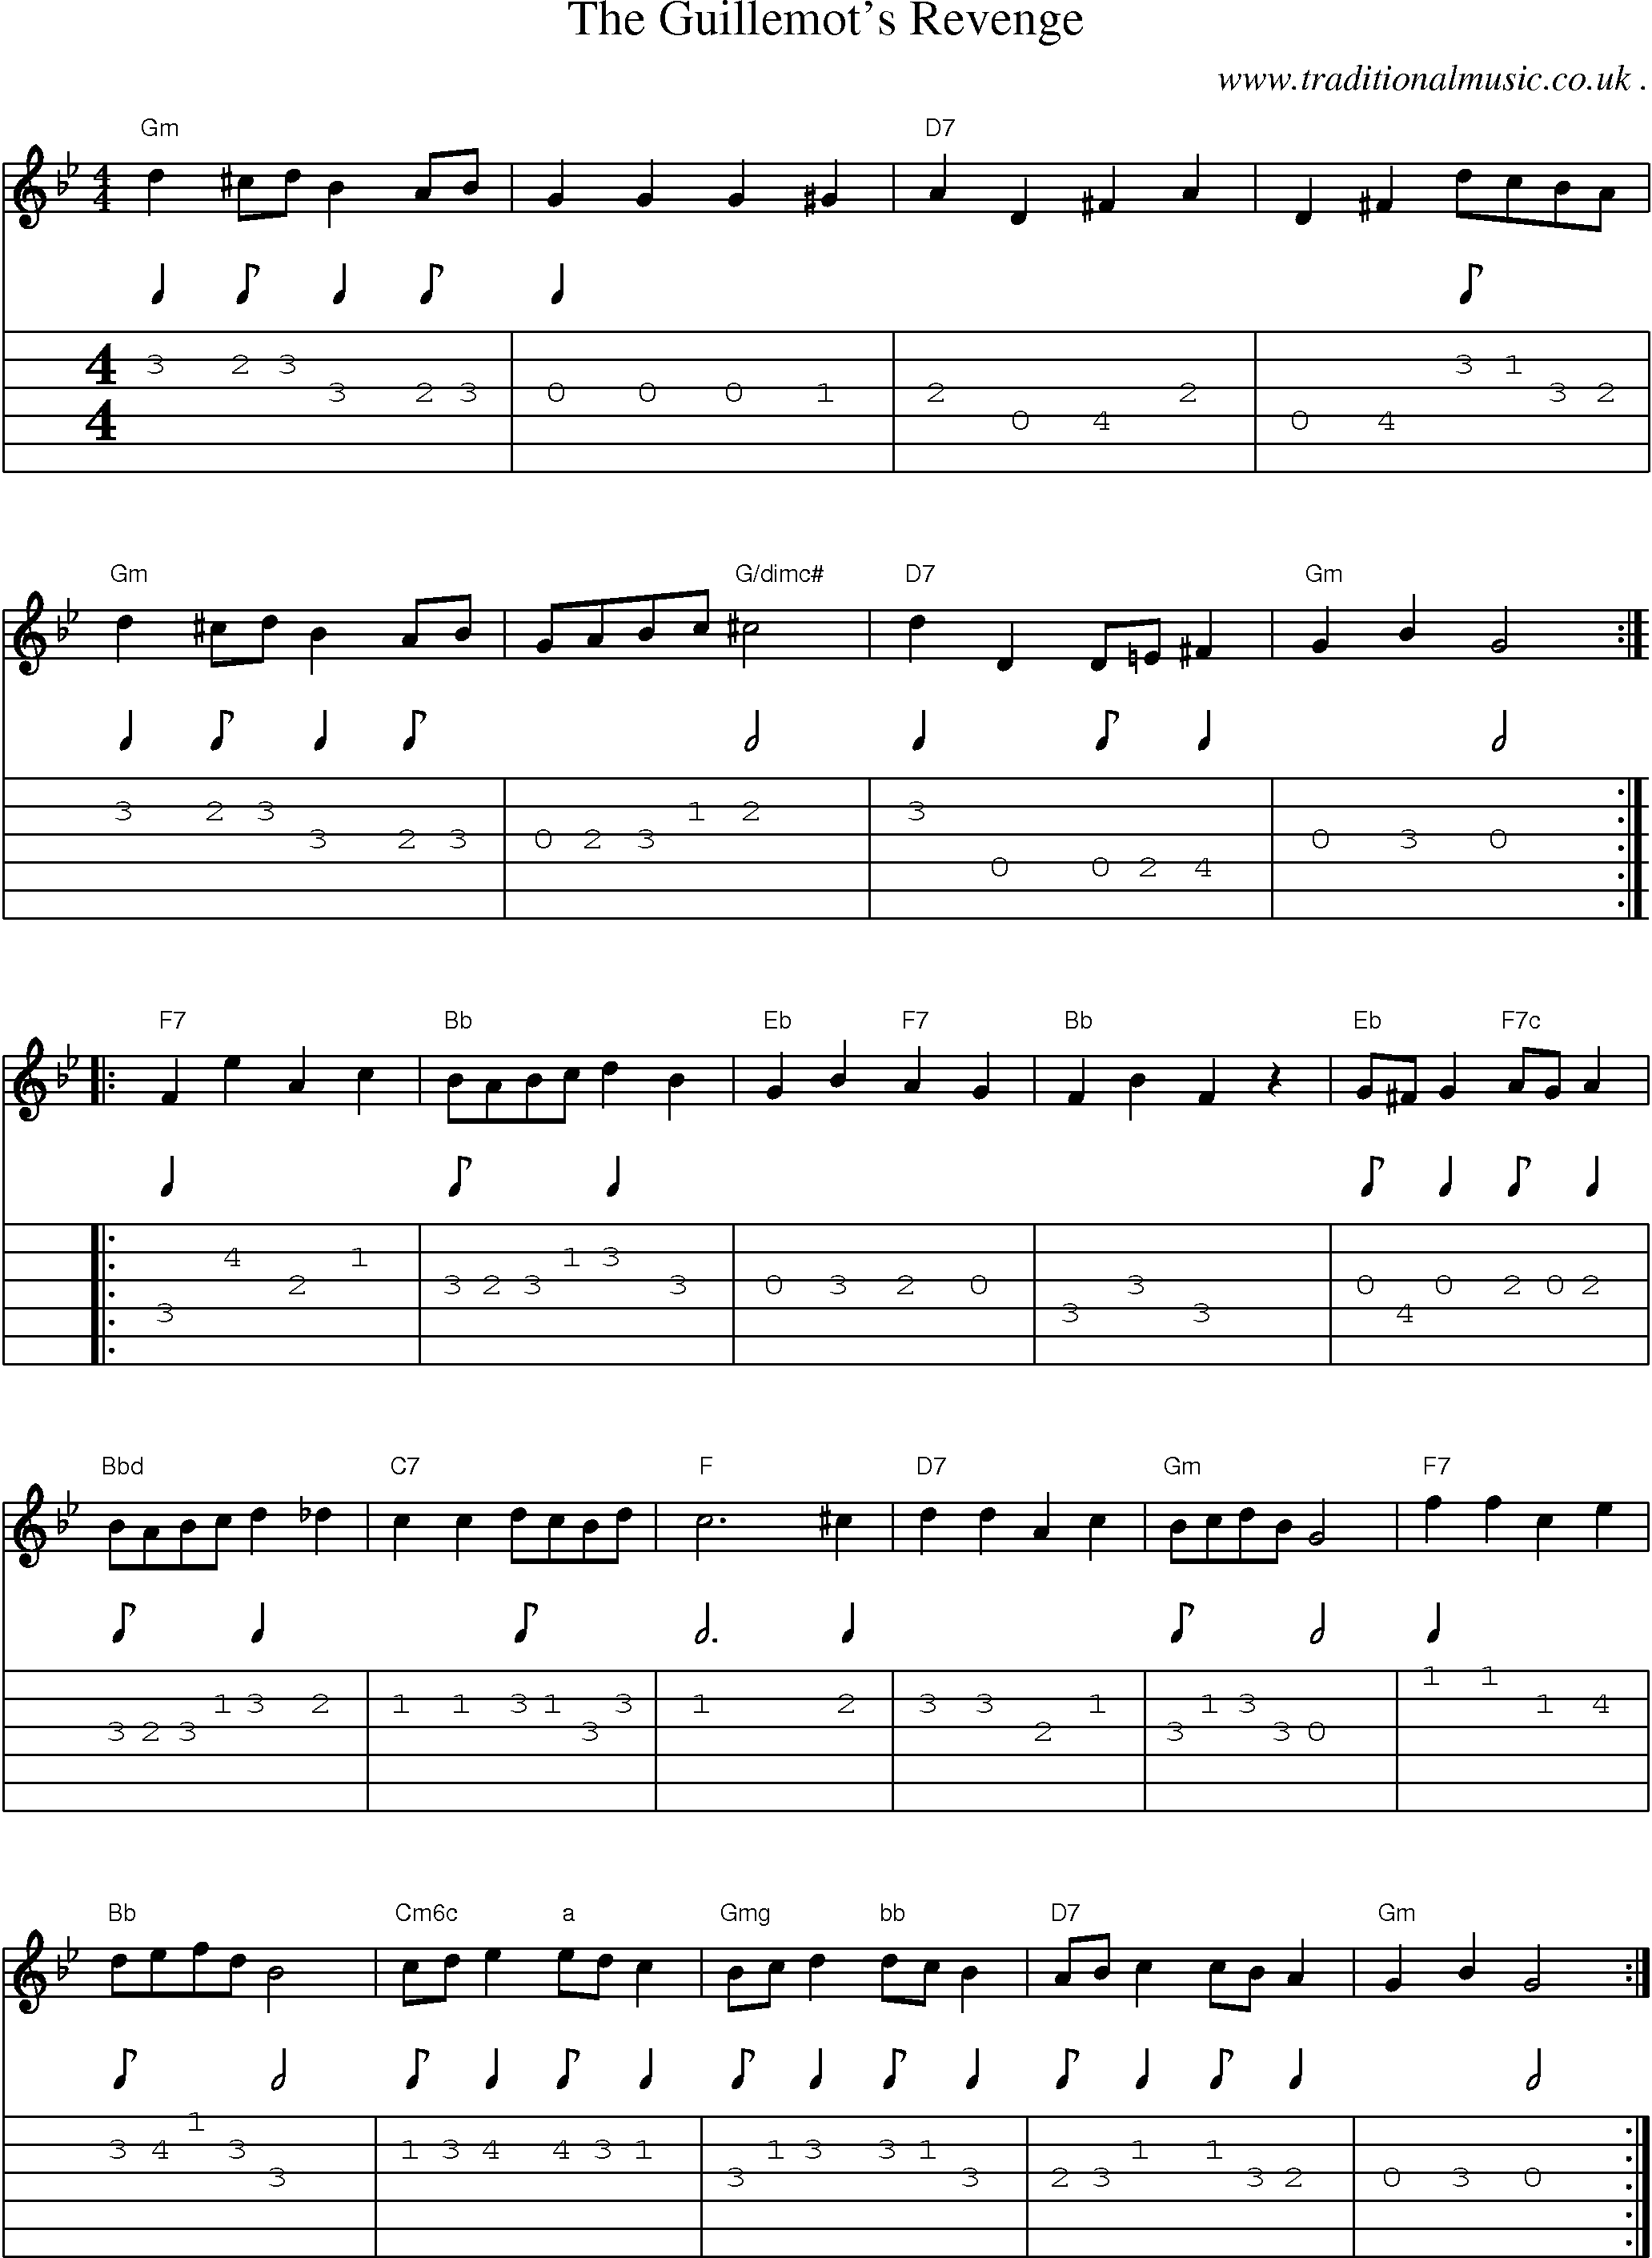 Sheet-Music and Guitar Tabs for The Guillemots Revenge